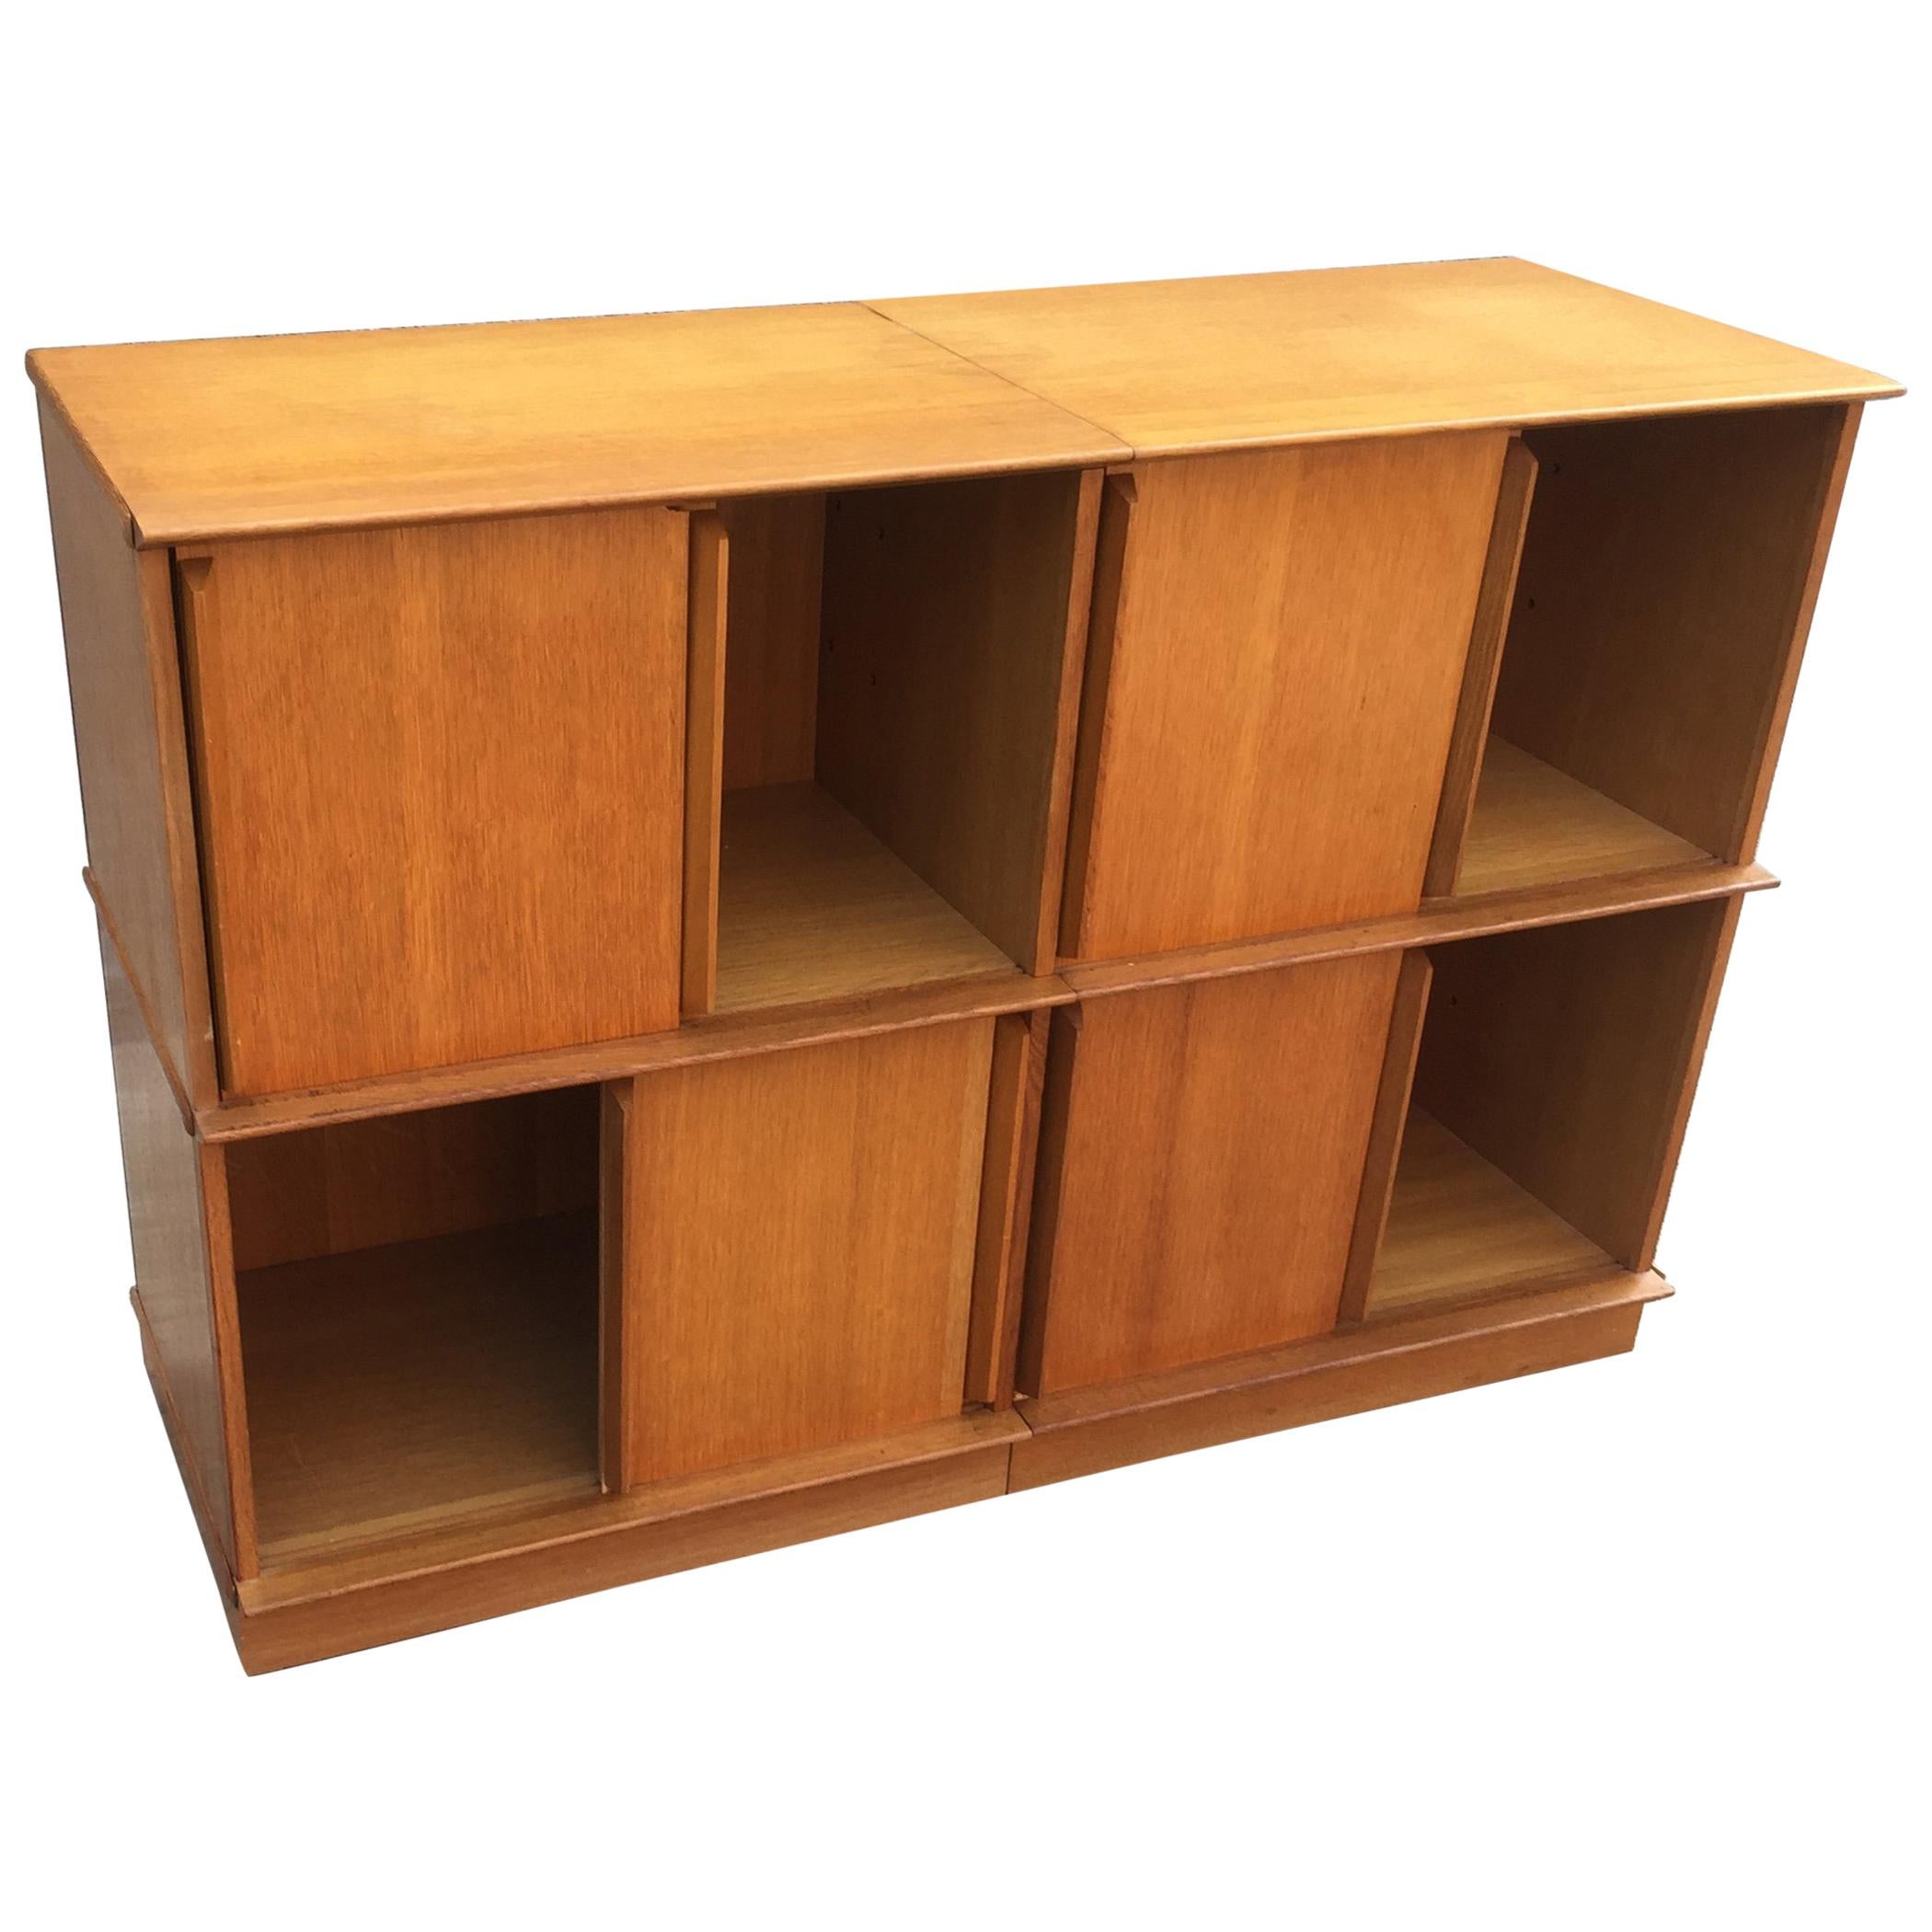 Oak Small Bookcase with Sliding Doors by Oscar, circa 1960 For Sale